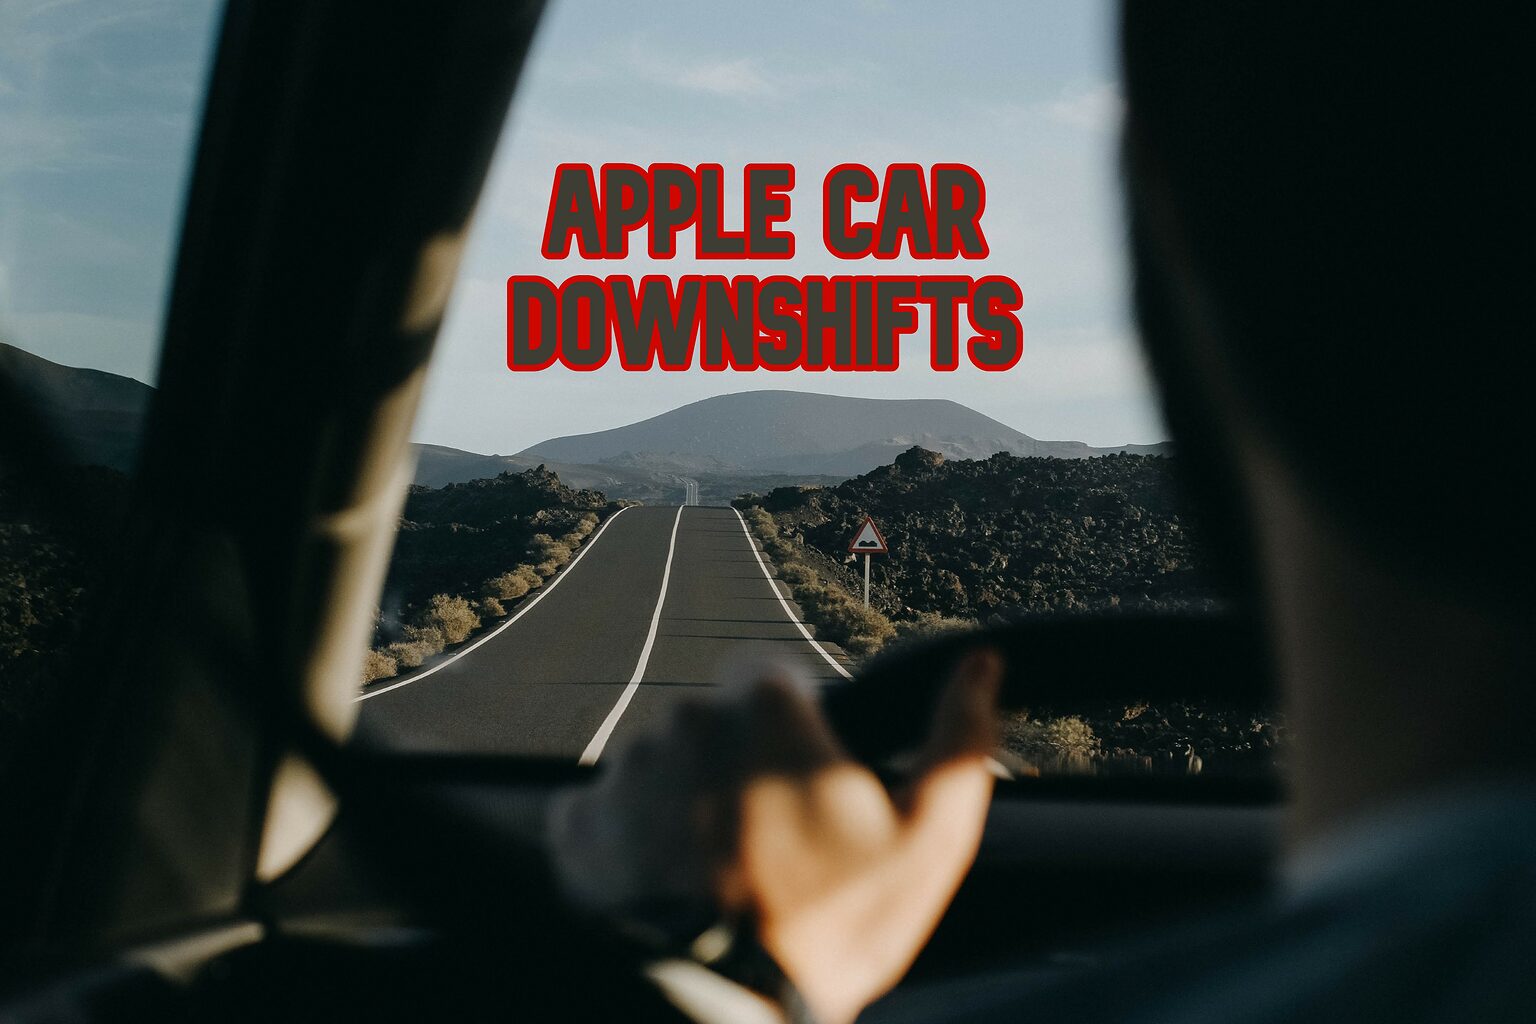 It looks like Apple's car will have a steering wheel after all.